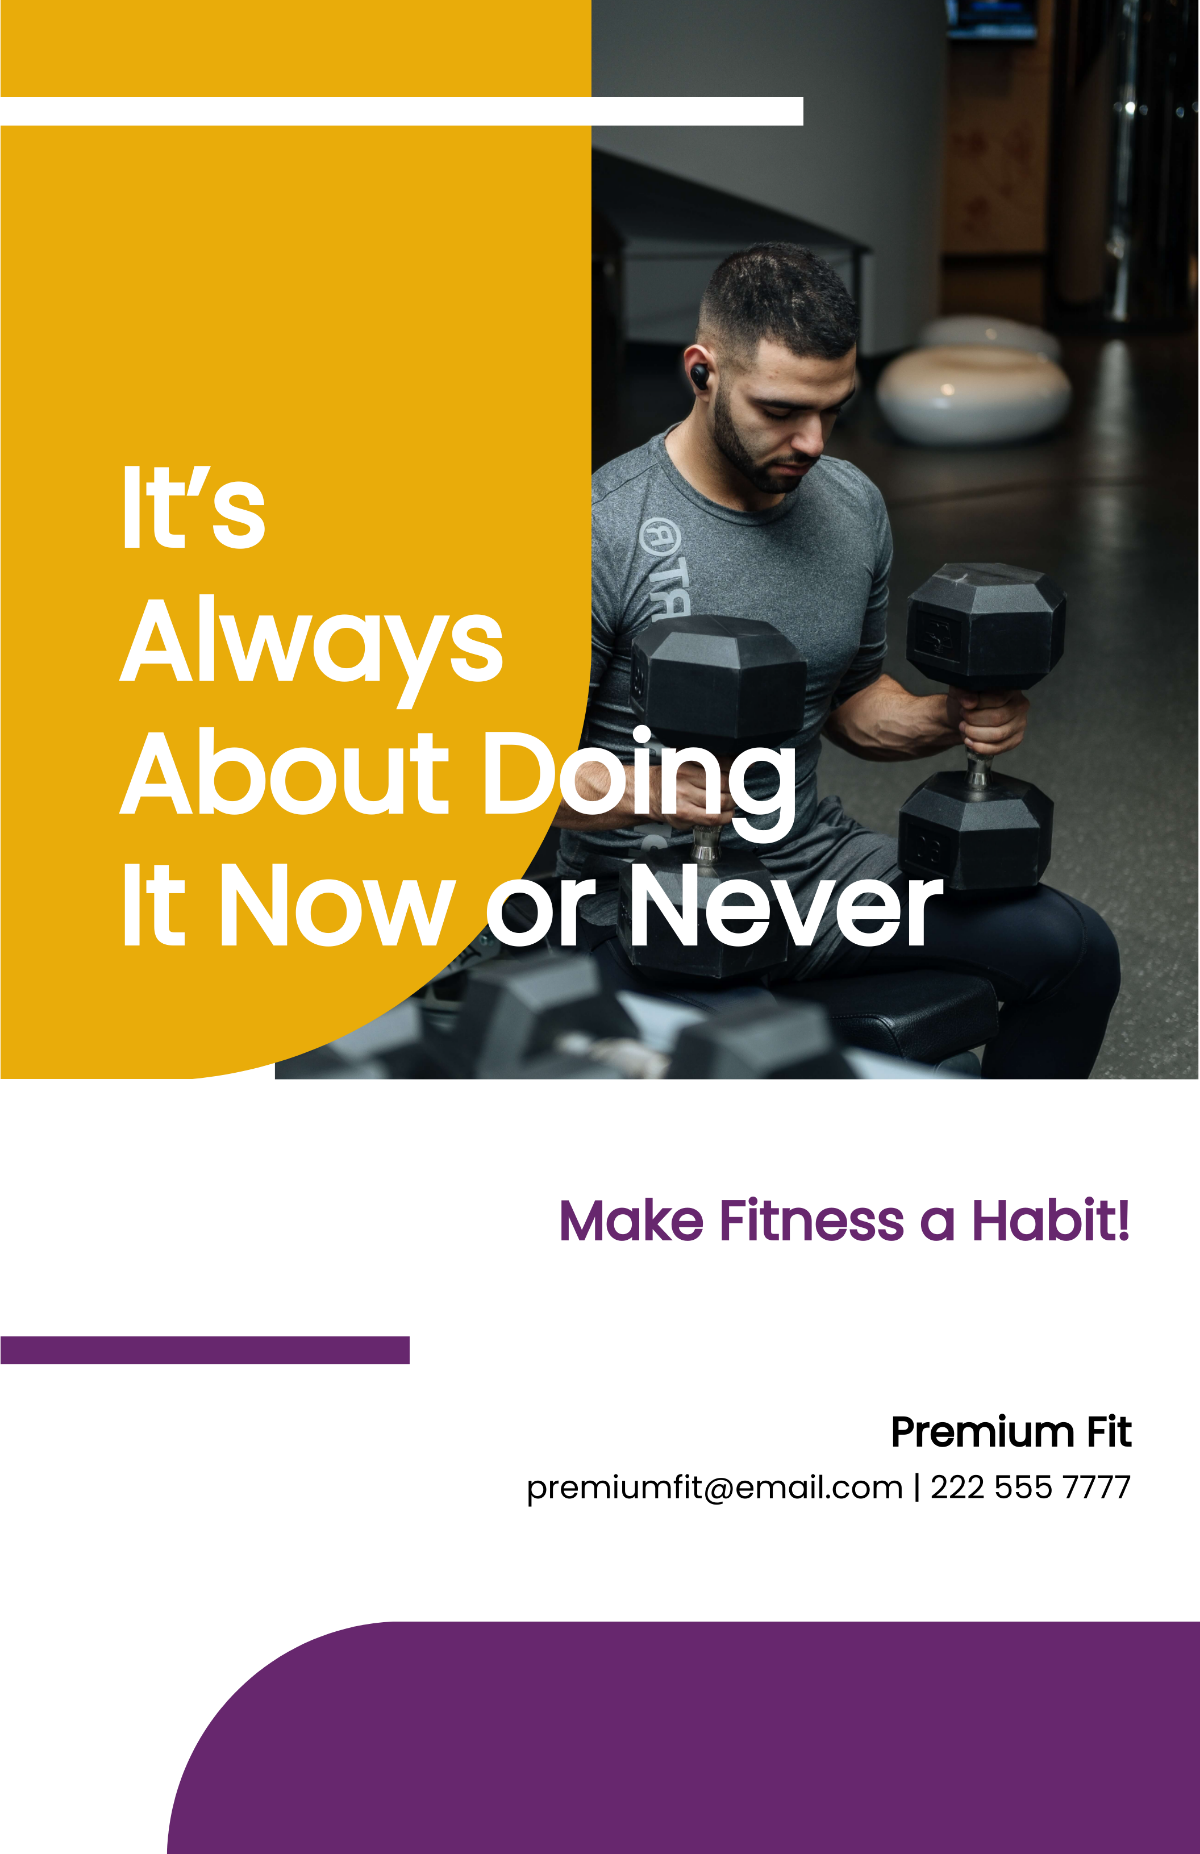 Fitness Motivational Poster Template